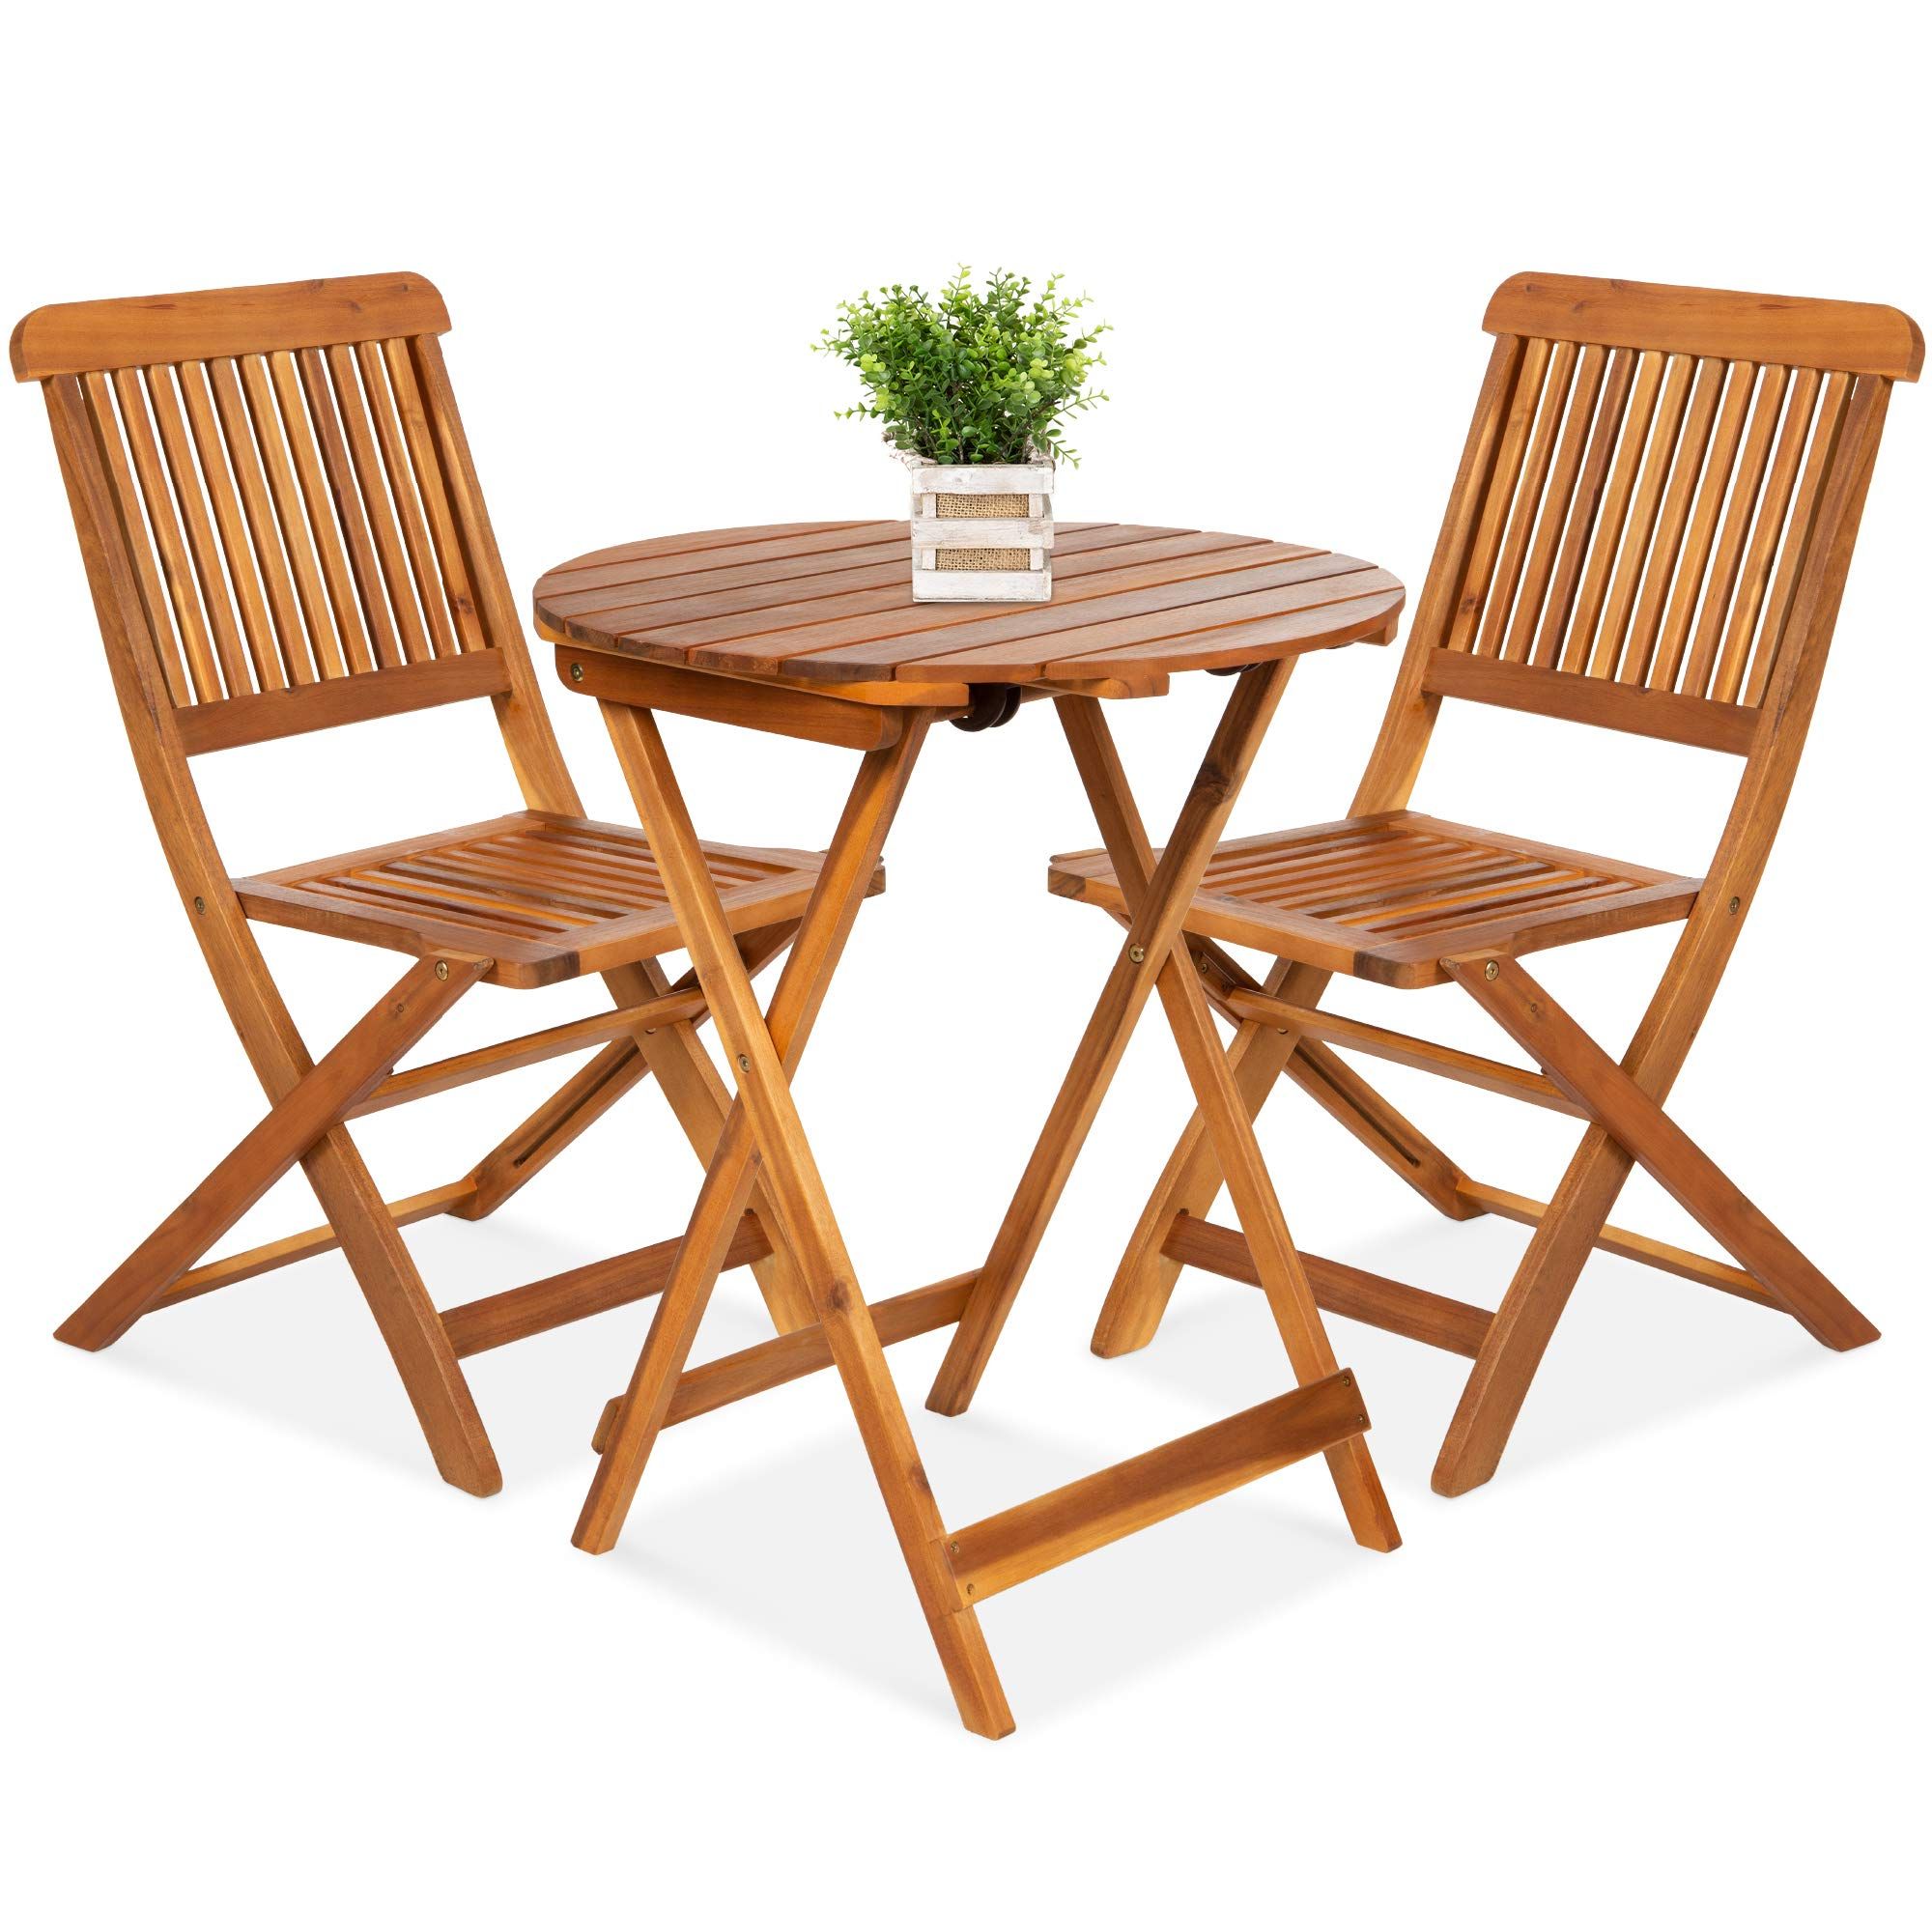 Preferred Amazon: Best Choice Products 3 Piece Acacia Wood Bistro Set, Folding  Patio Furniture For Backyard, Balcony, Deck W/ 2 Chairs, Round Coffee Table,  Teak Finish – Natural : Patio, Lawn & Garden With Acacia Wood With Table Garden Wooden Furniture (Photo 9 of 15)